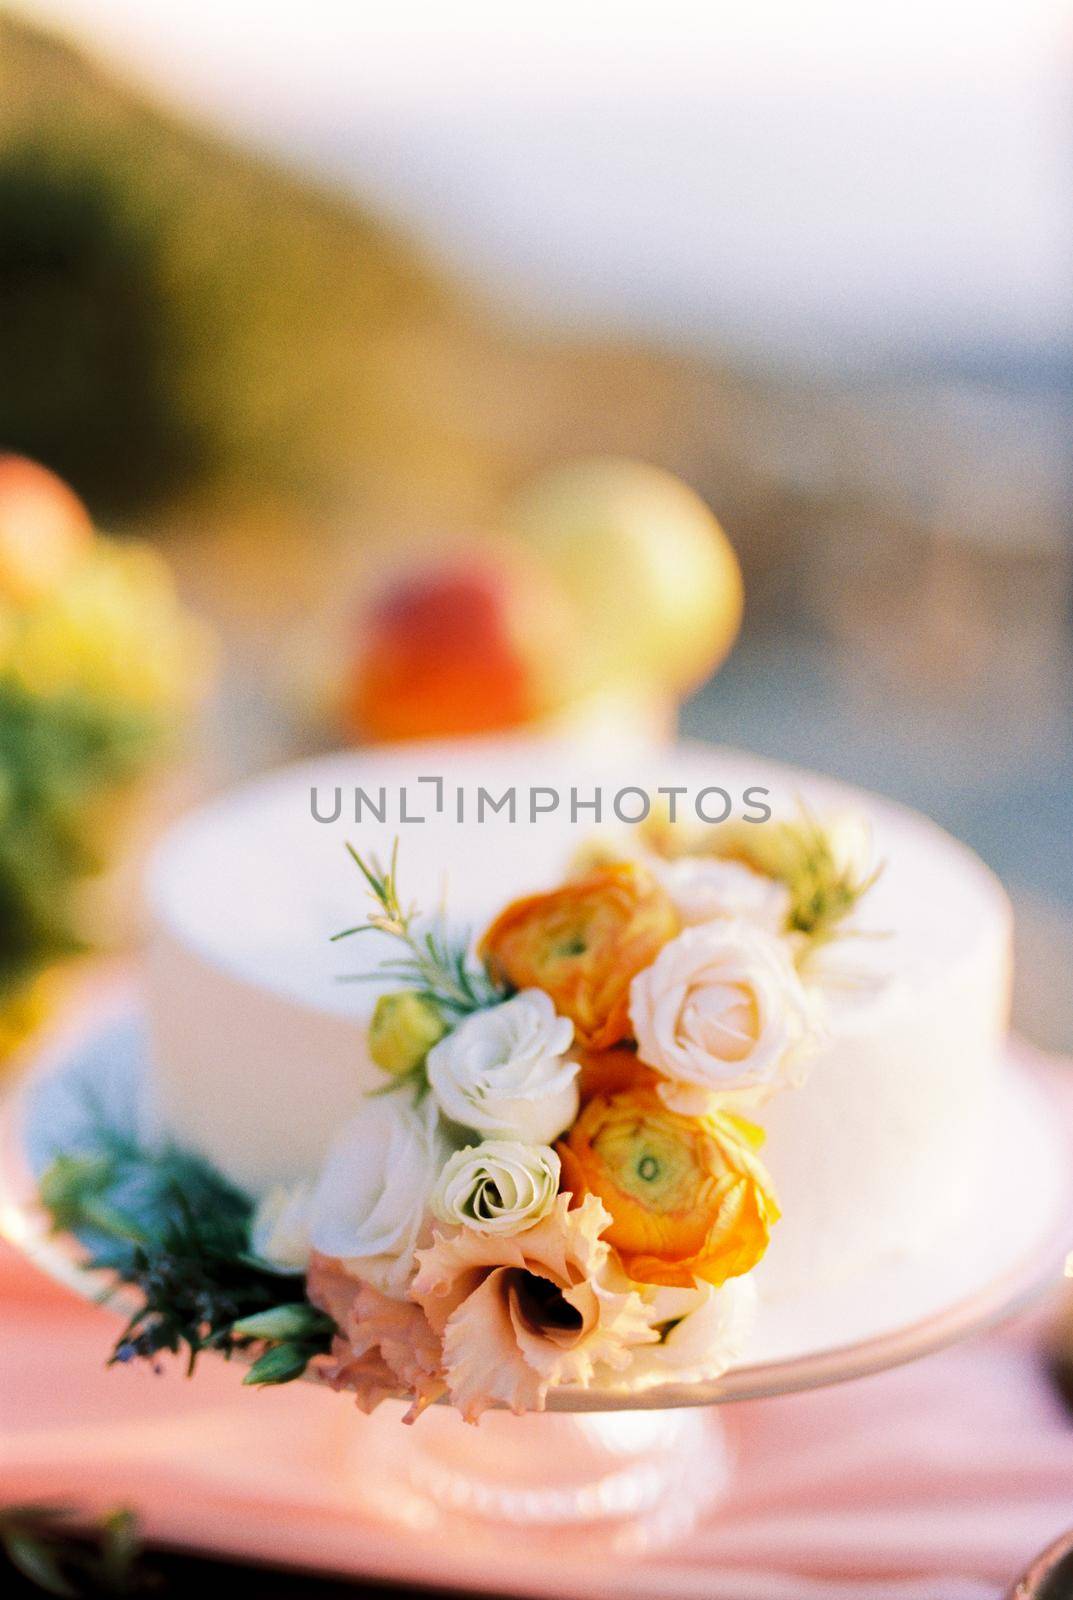 Wedding cake decorated with flowers stands on the table. High quality photo